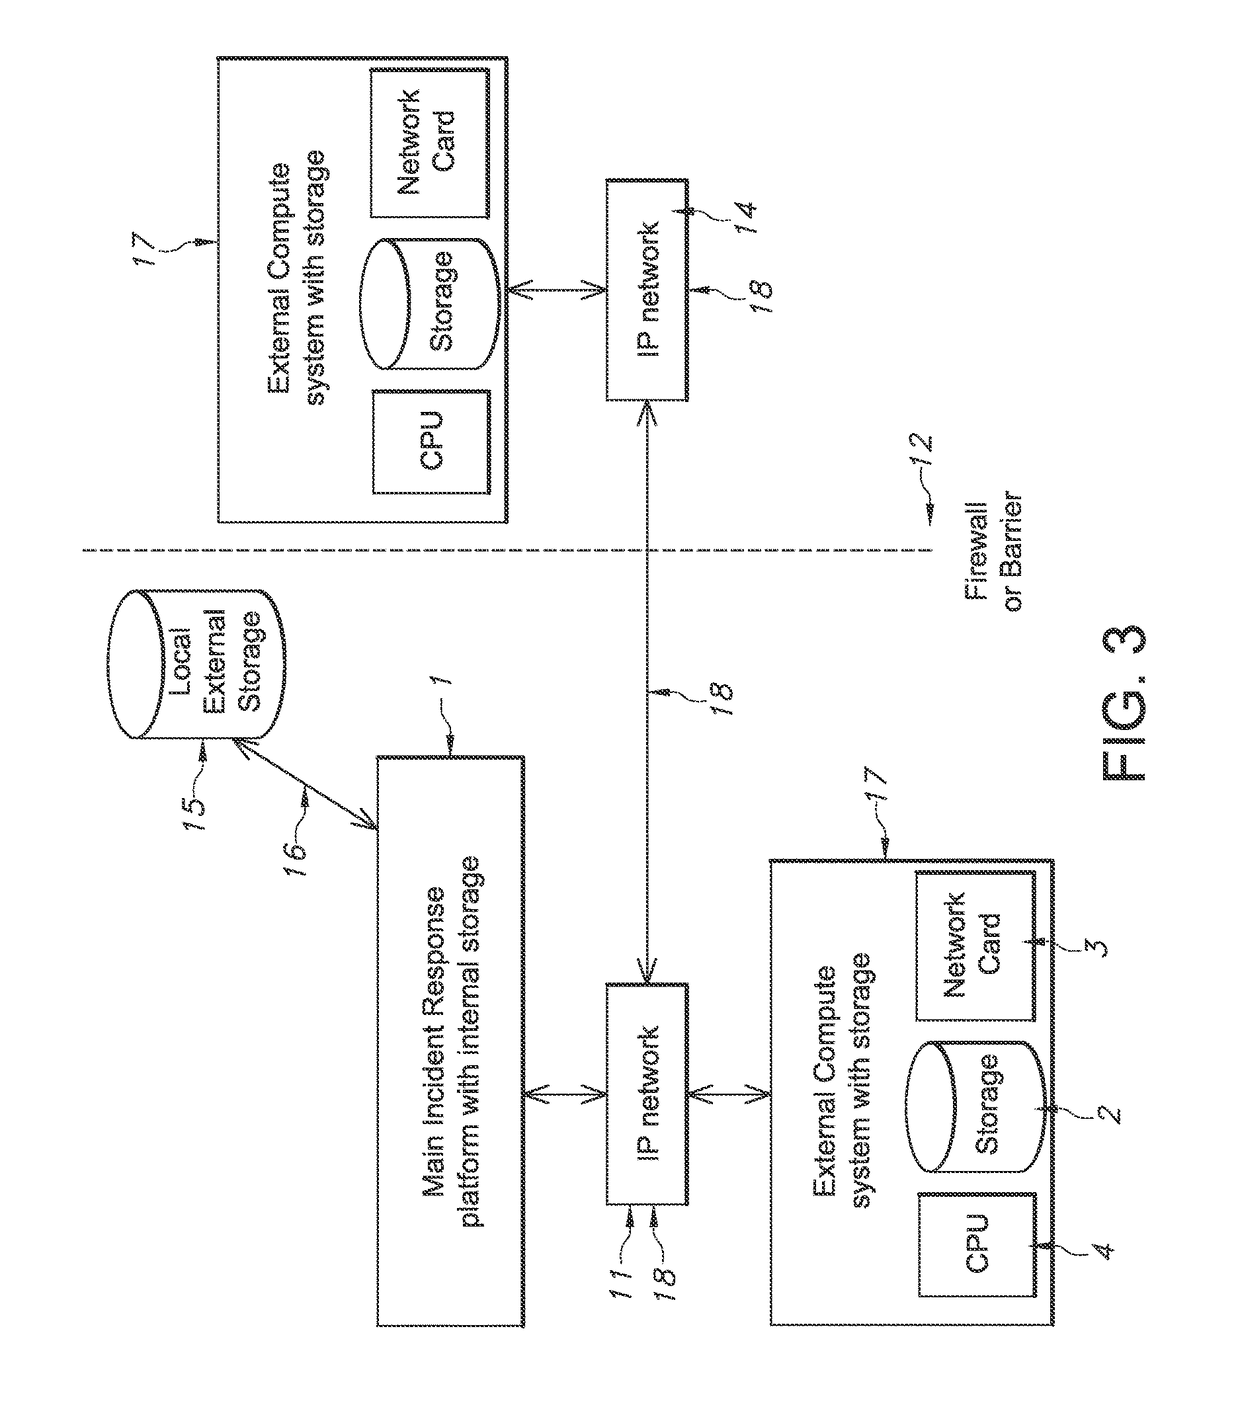 Incident response management system and method